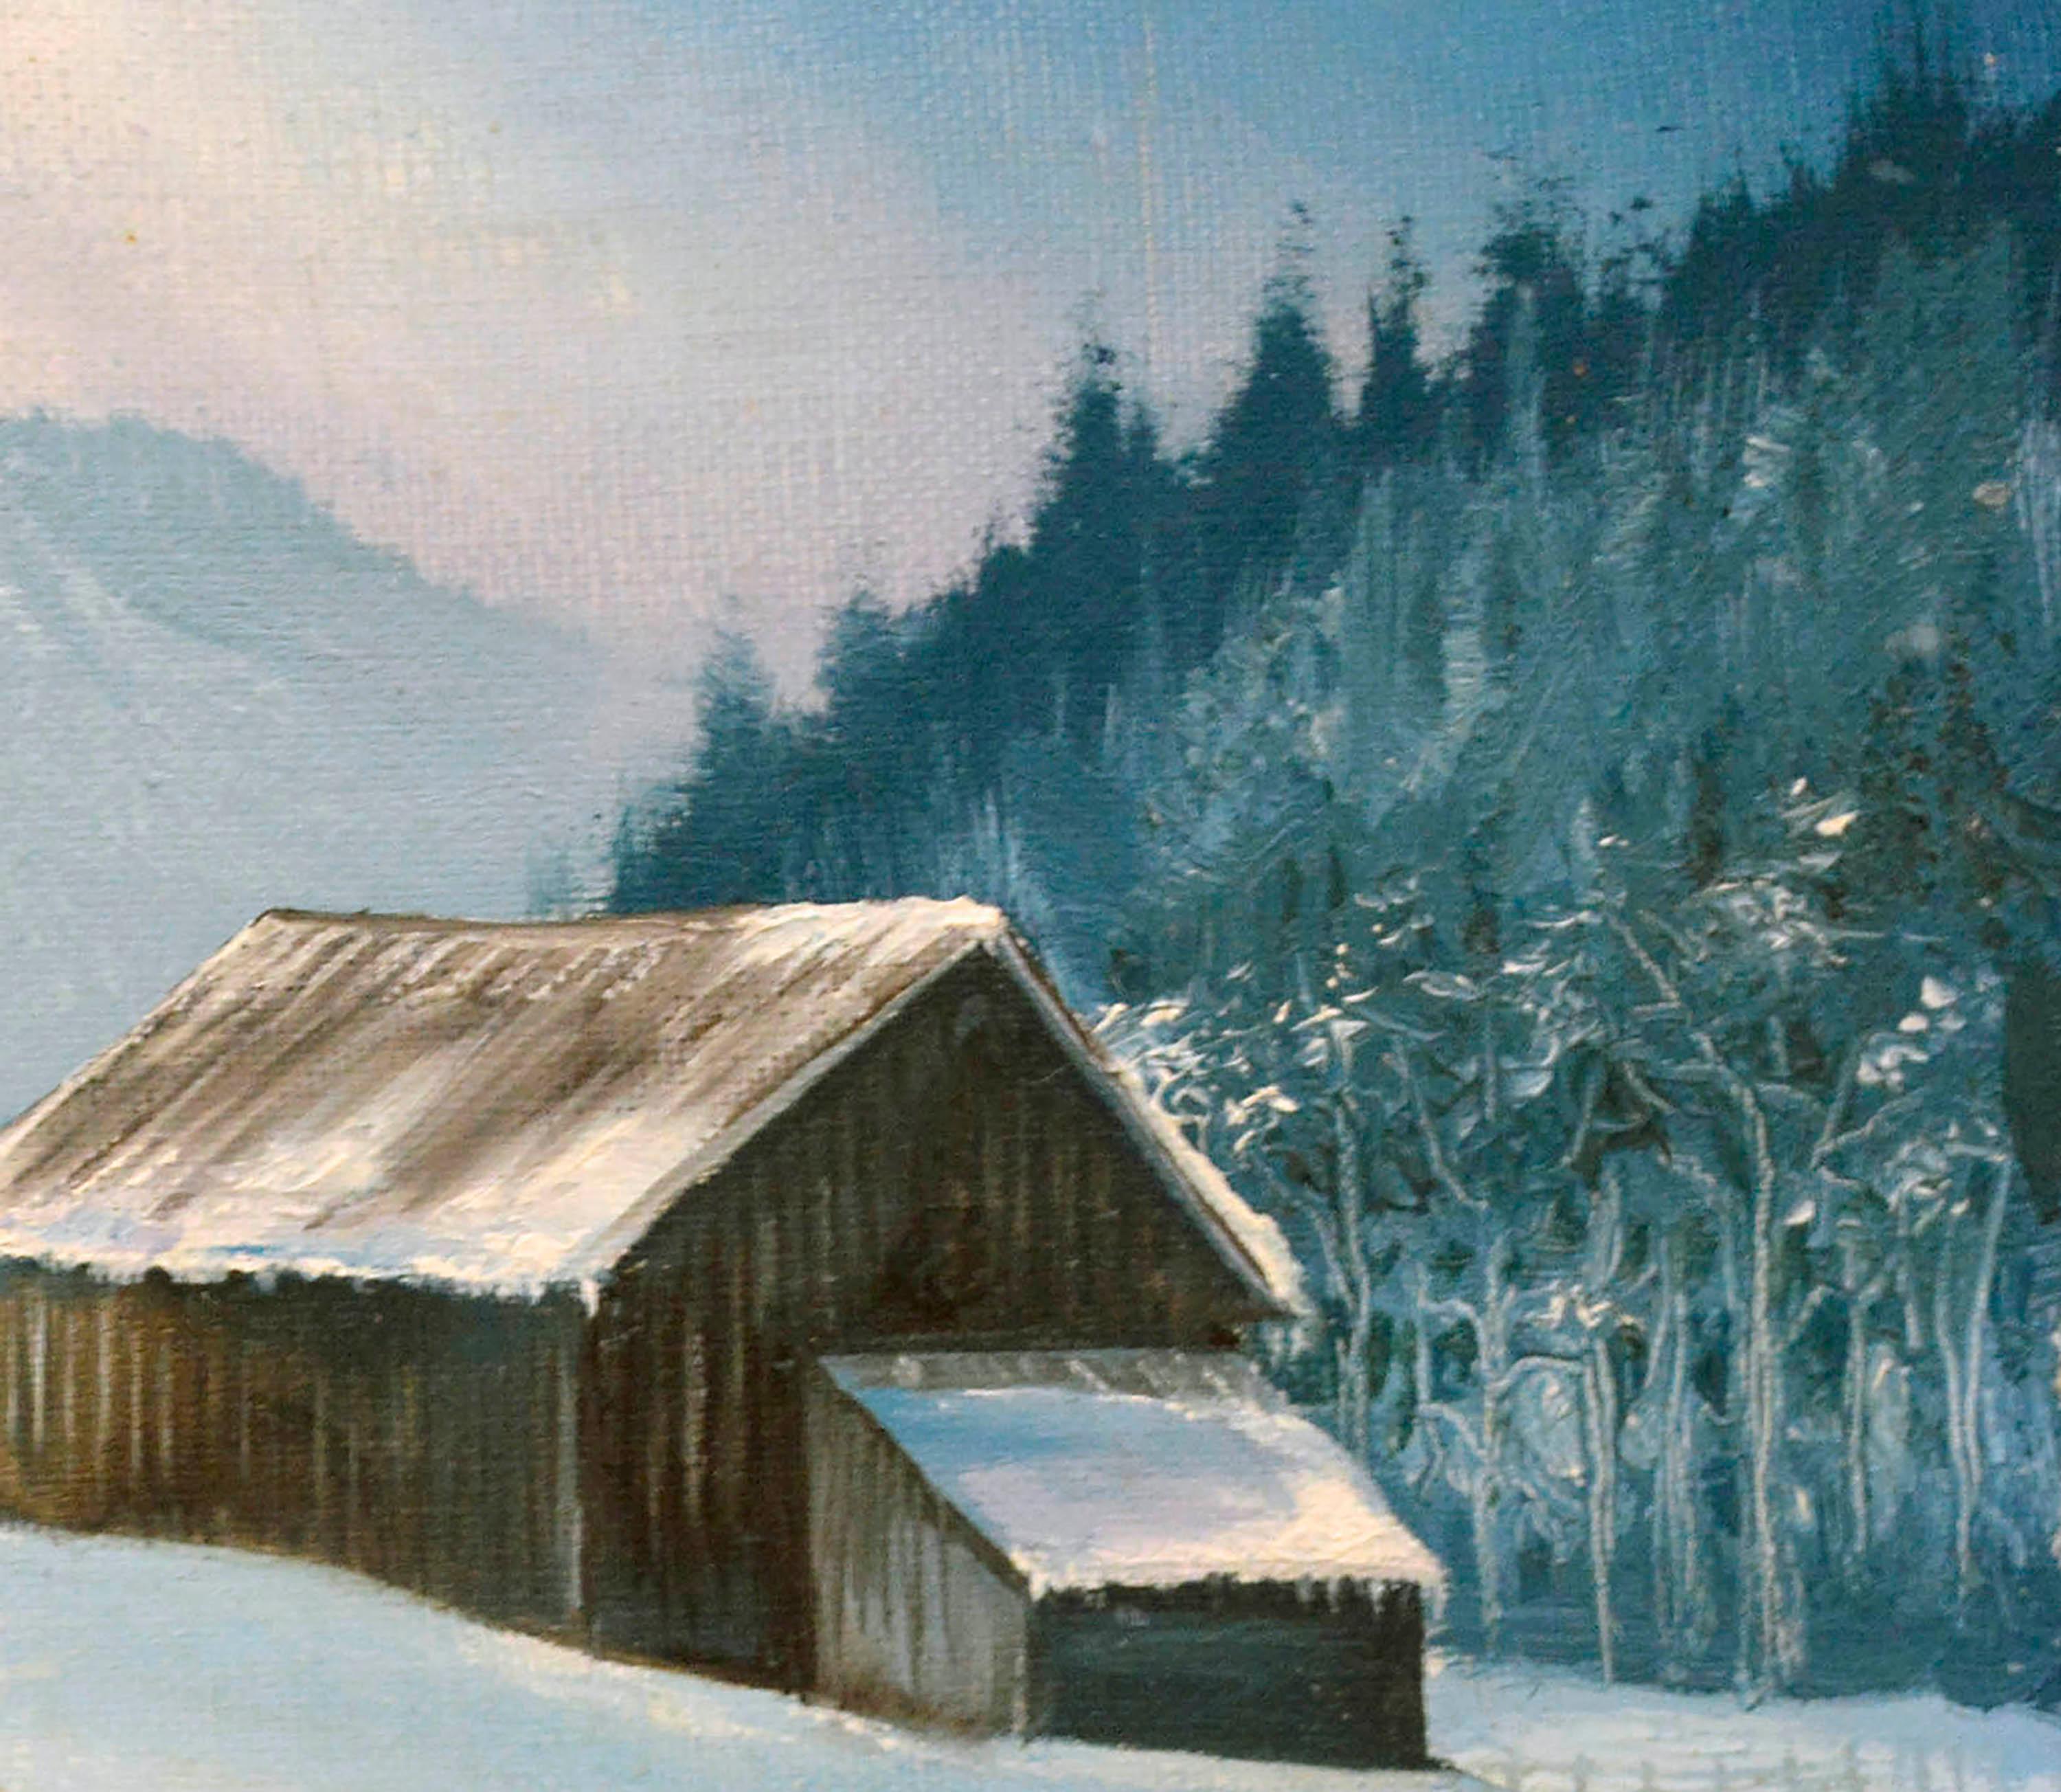 snowy landscape with cabin